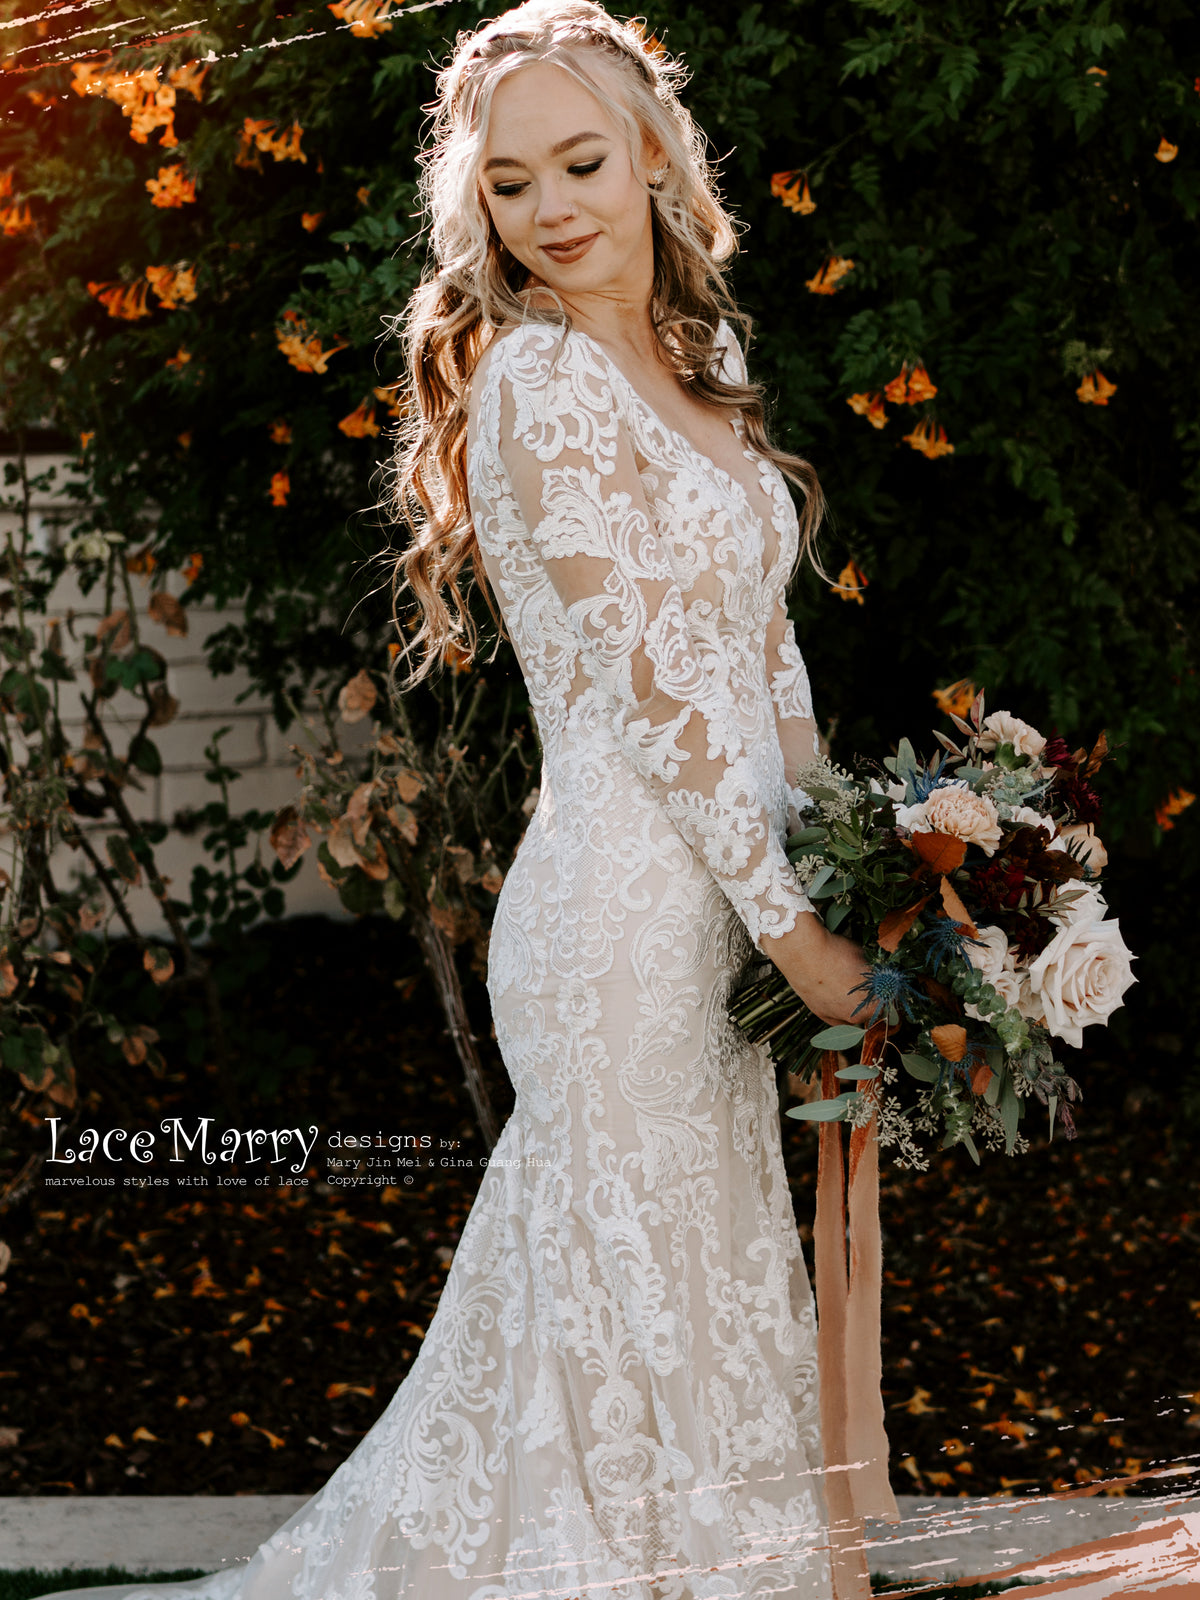 Long Lace Sleeves Wedding Dress- LaceMarry